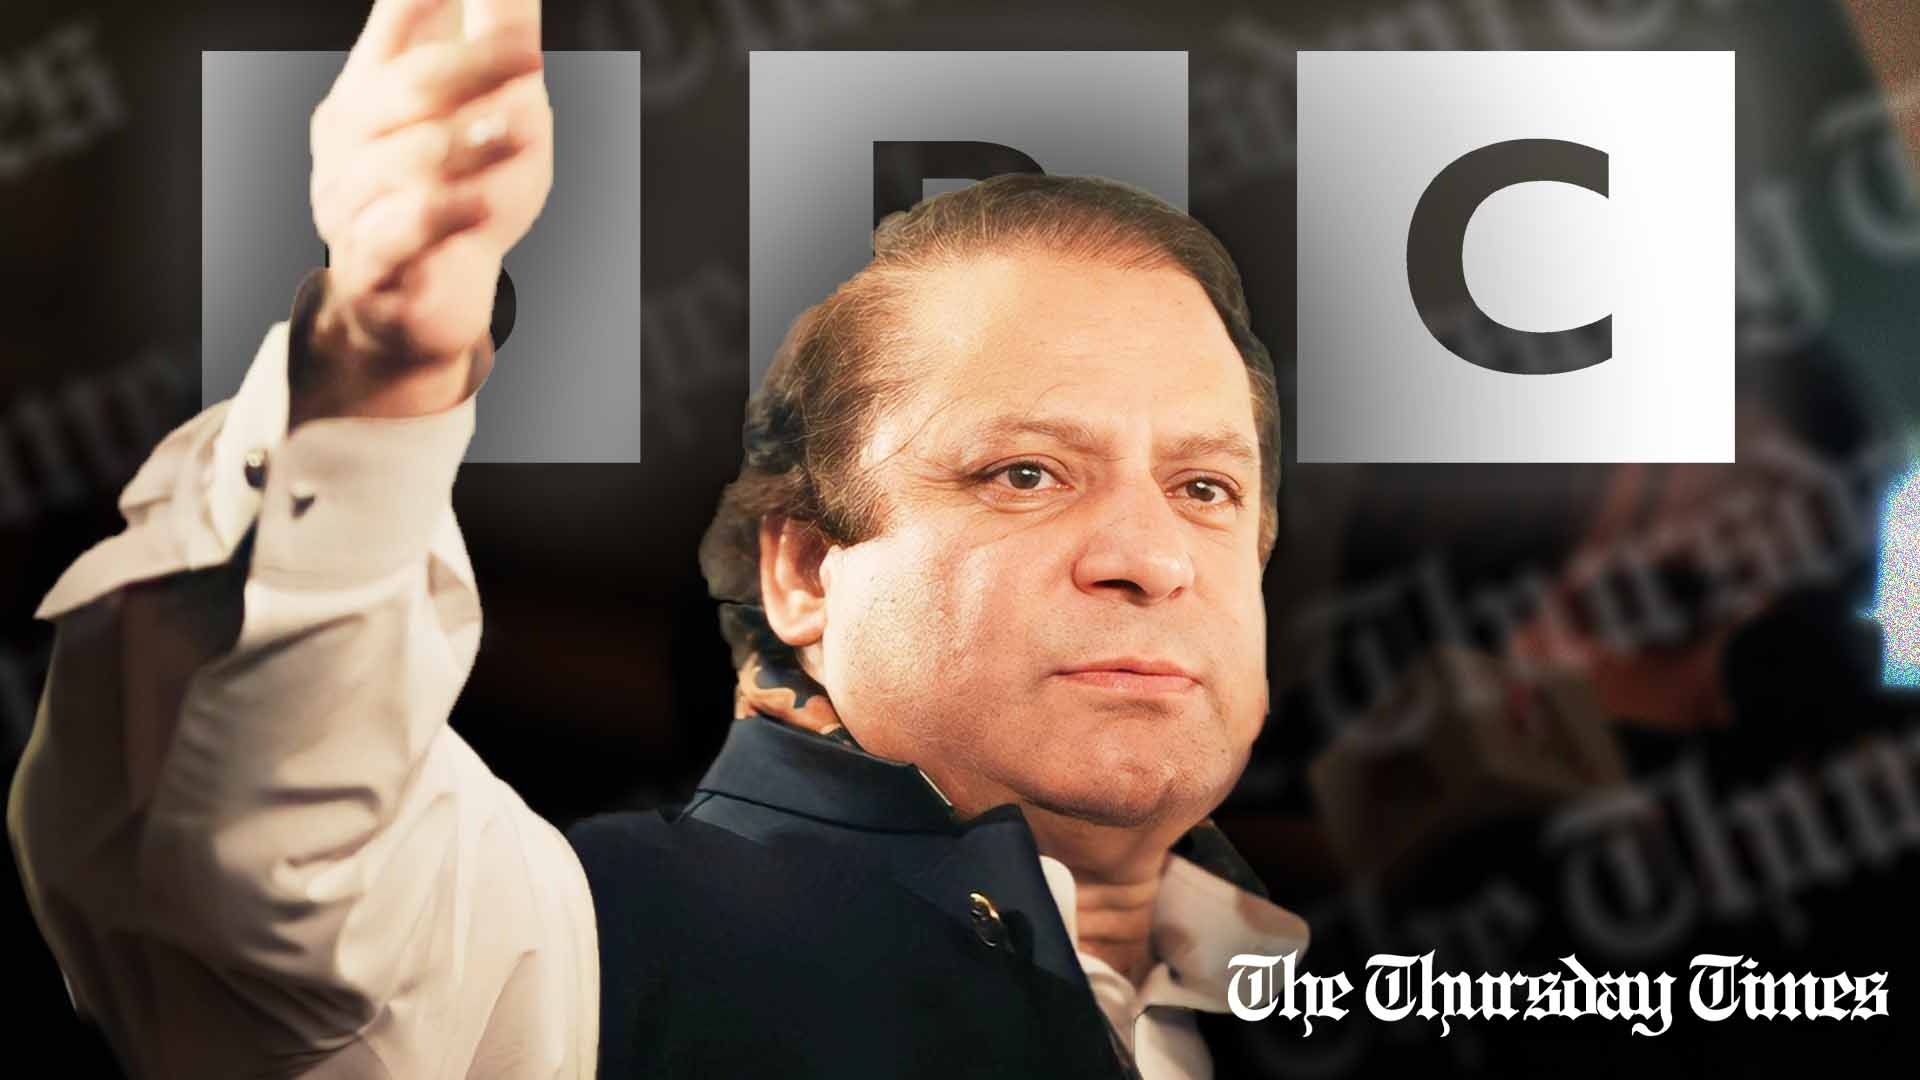 A file photo is shown of former prime minister and incumbent PML(N) supremo Nawaz Sharif. — FILE/THE THURSDAY TIMES